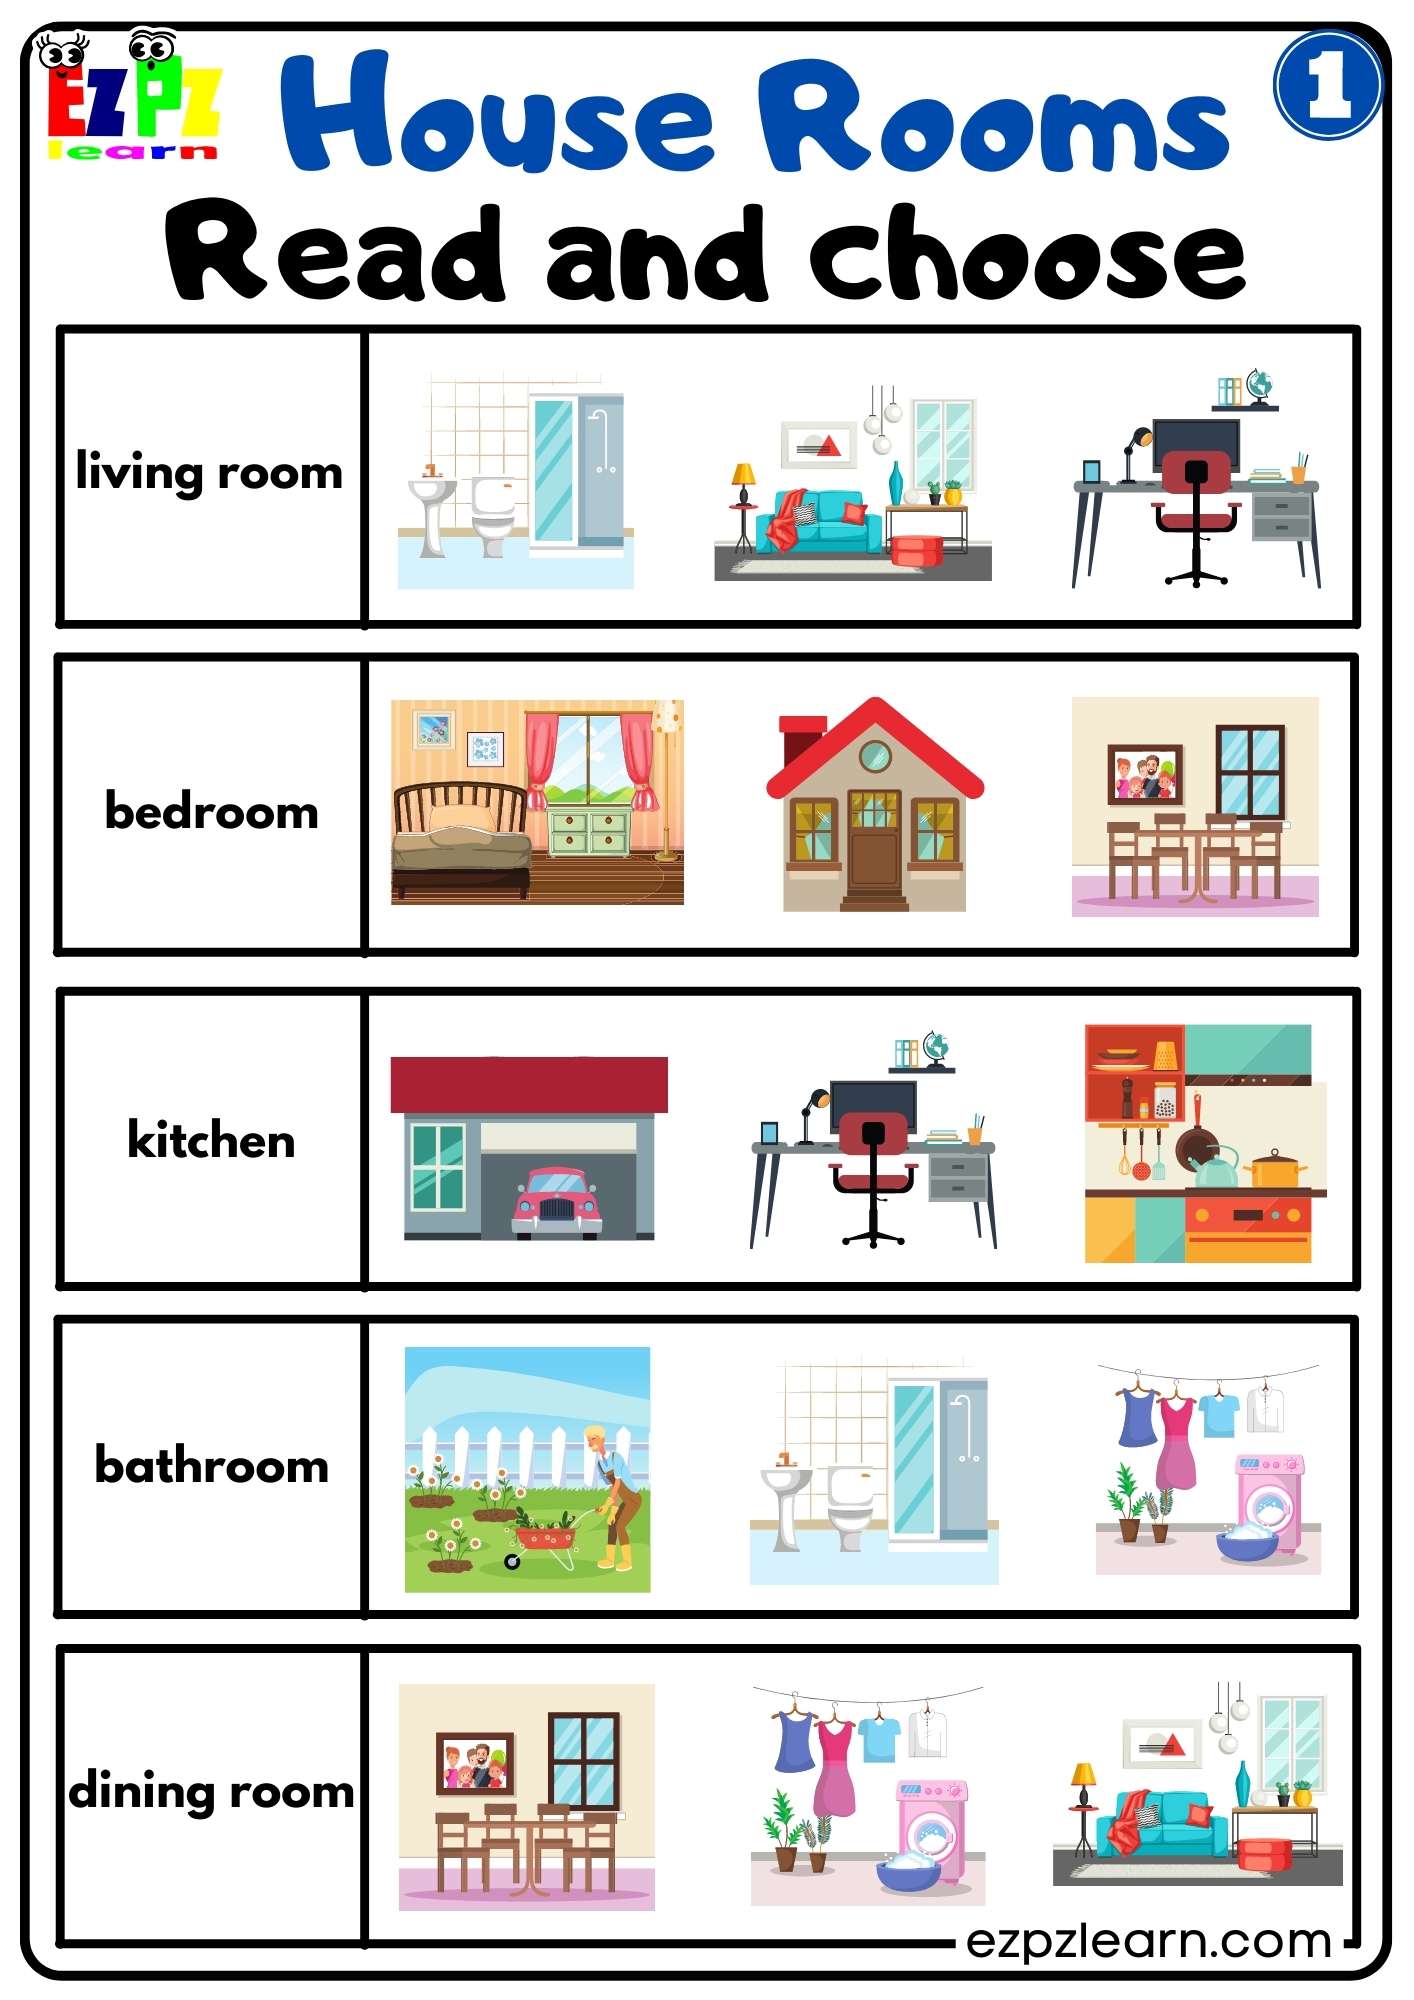 Learning the vocabulary for rooms in a house using pictures and words.